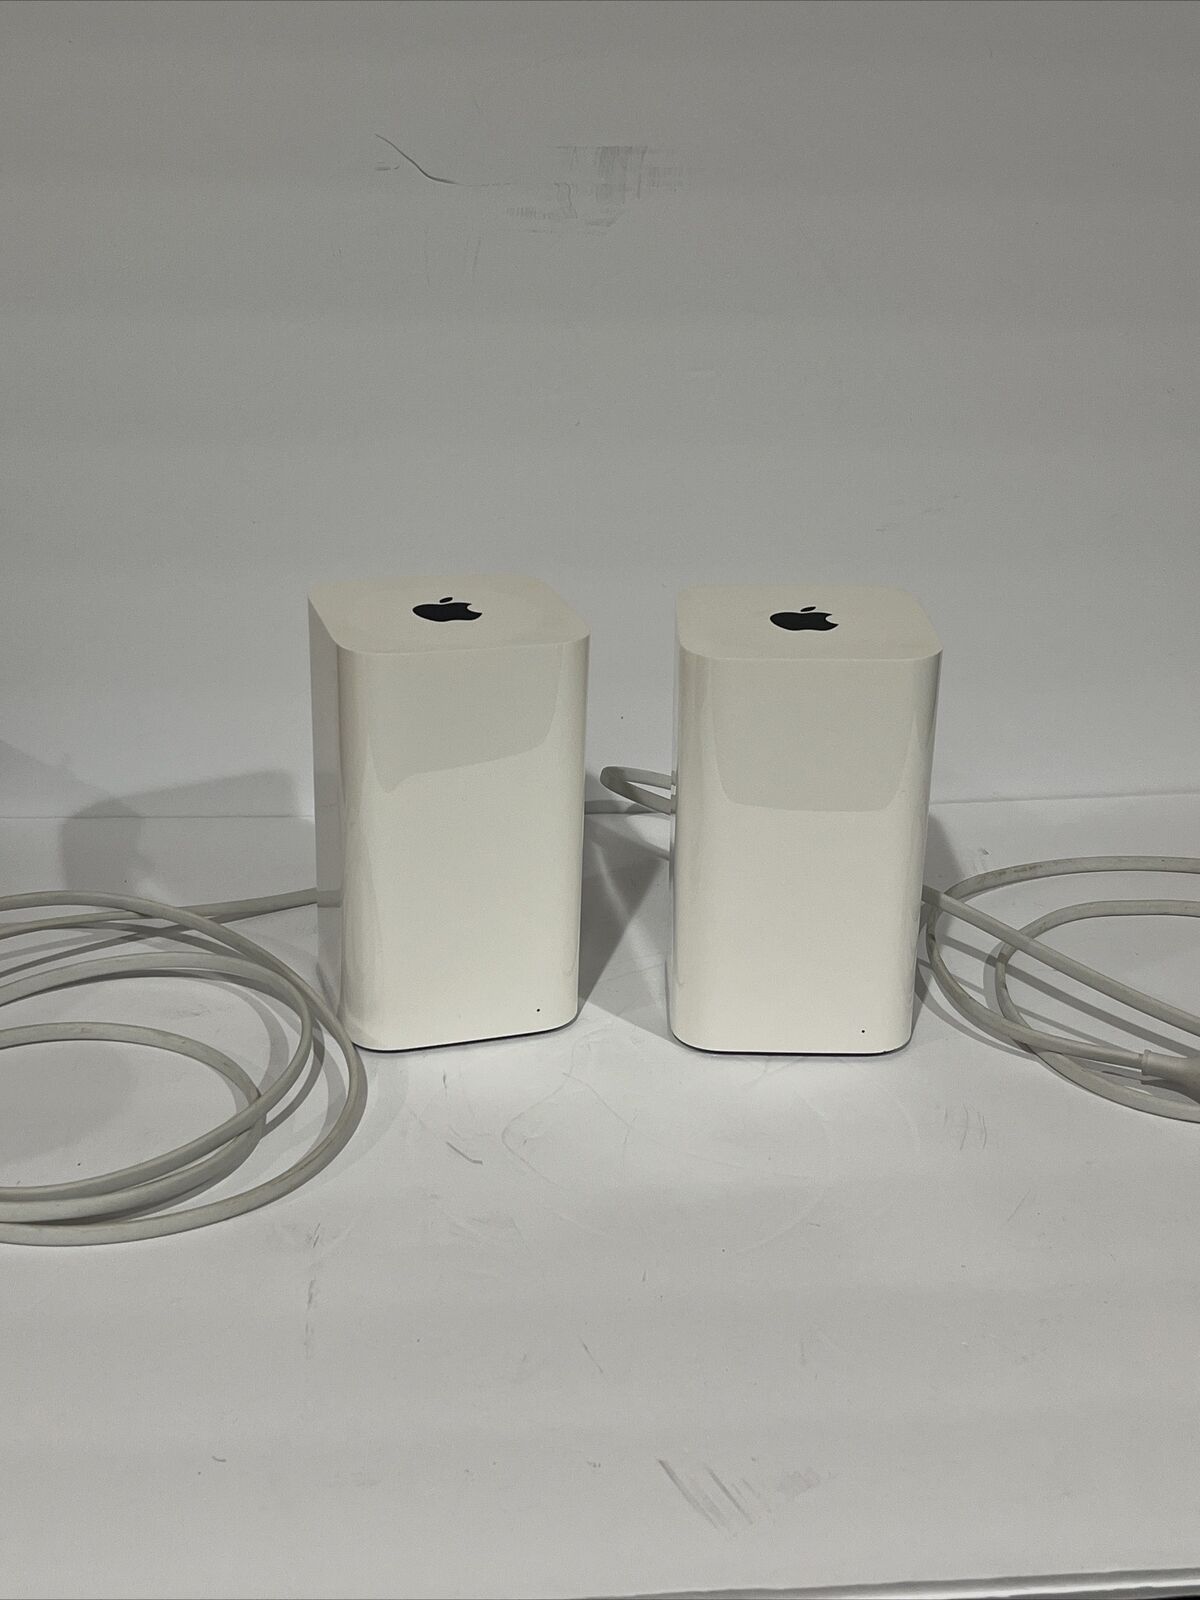 Apple A1521 AirPort Extreme Base Station Wireless Router Working Great